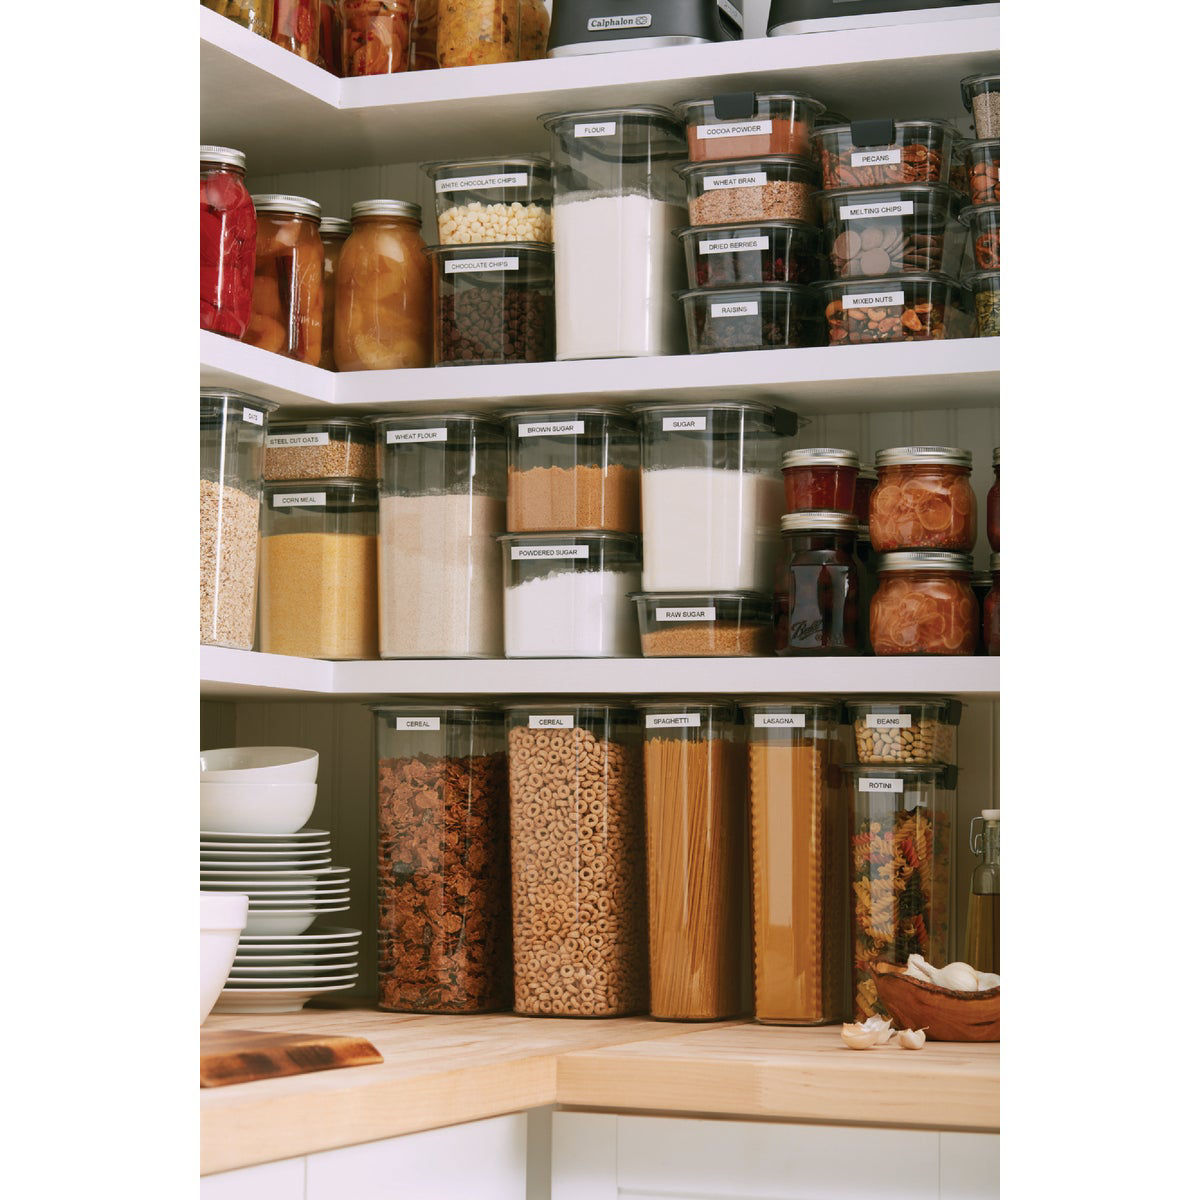 Bins With Lids Date And Time Display Extra Large Food Storage Containers  With - Airtight Kitchen & Pantry Bulk Food Storage For Kitchen  Organization.